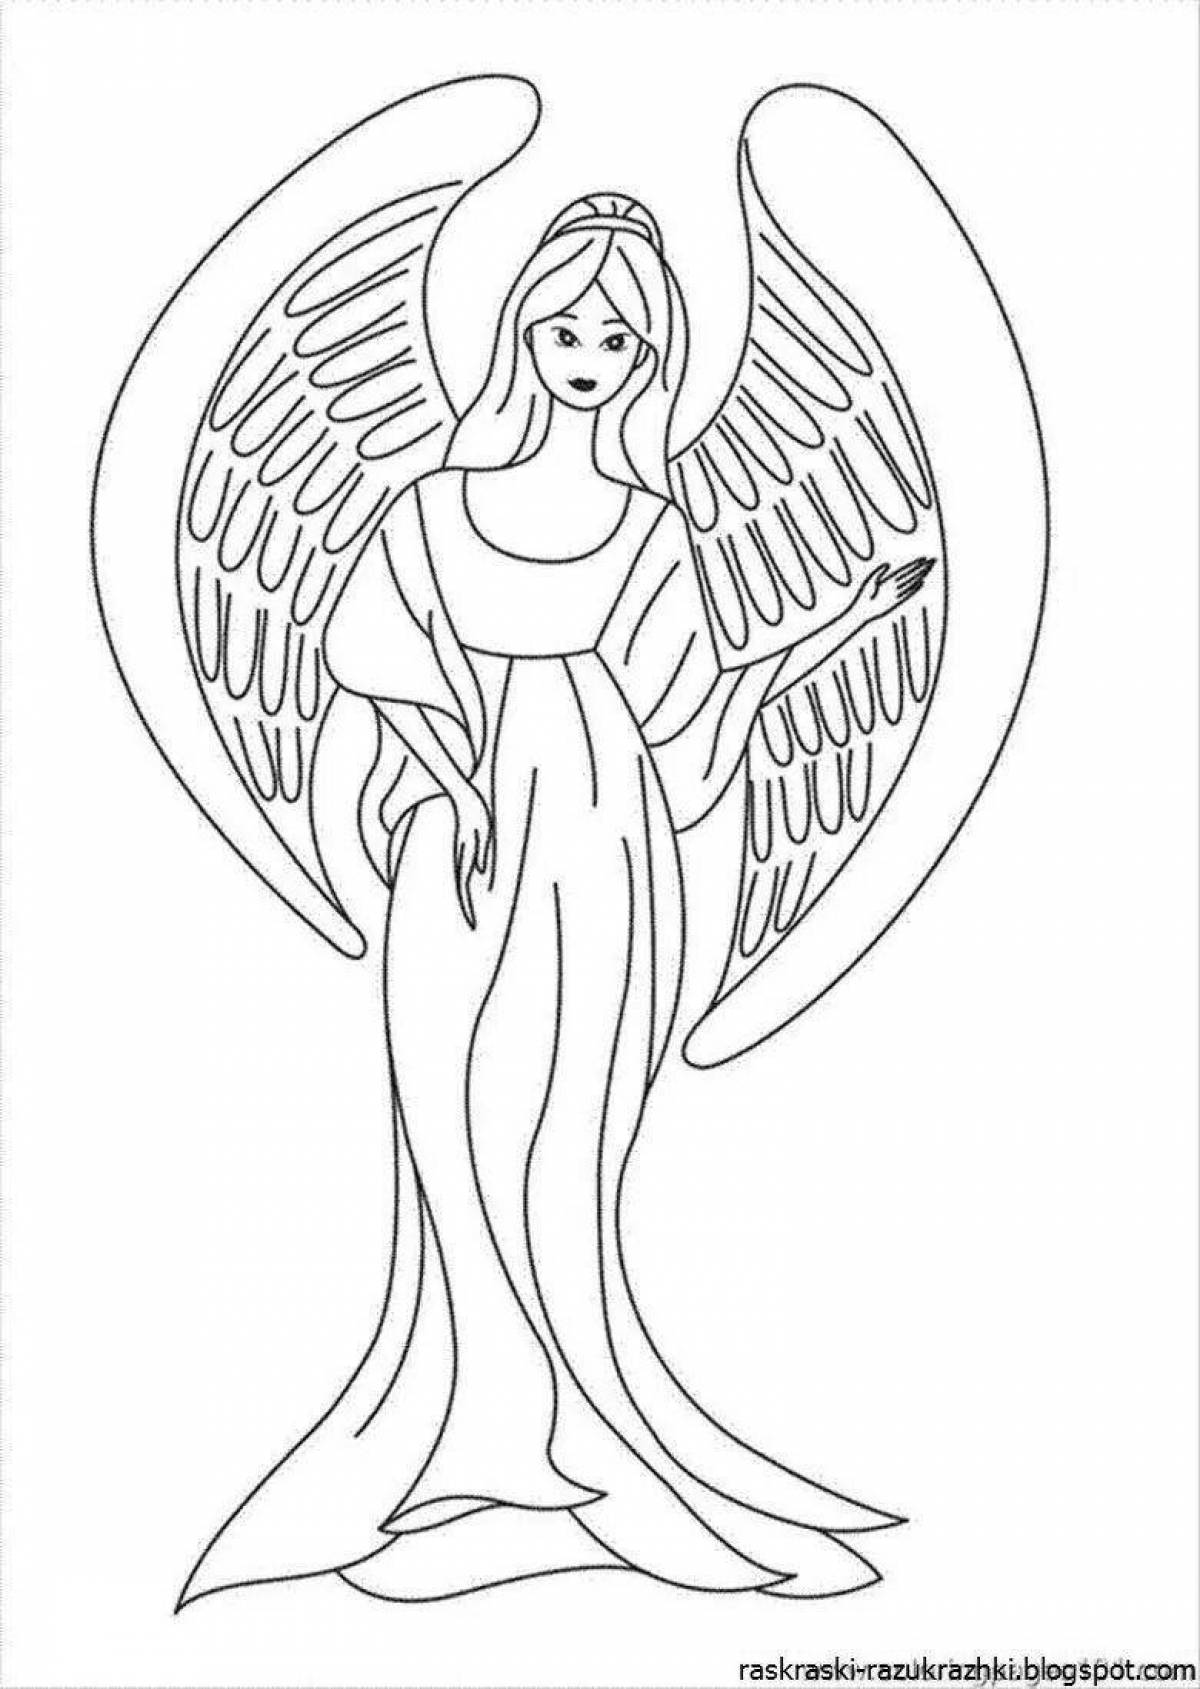 Delightful coloring book angel with wings for children